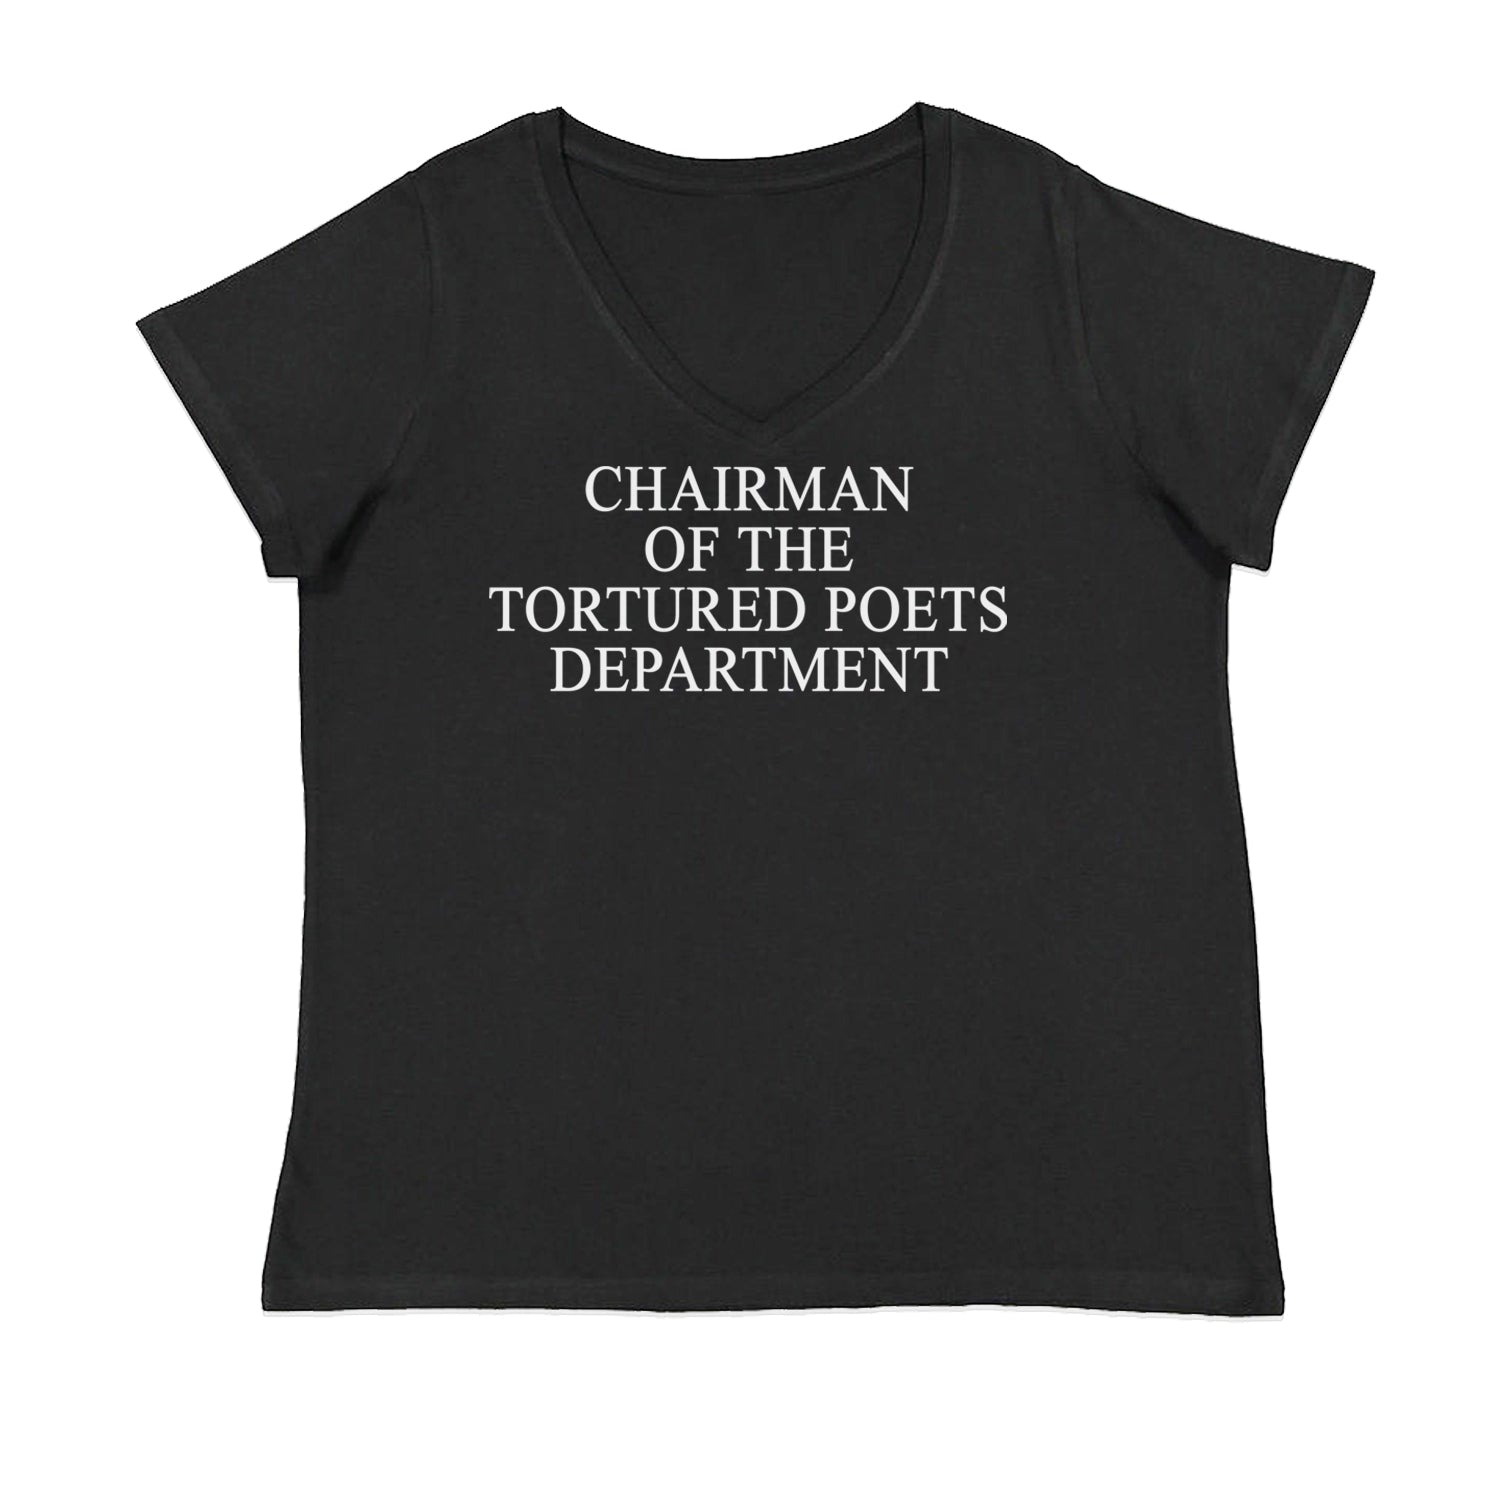 Chairman Of The Tortured Poets Department Womens Plus Size V-Neck T-shirt